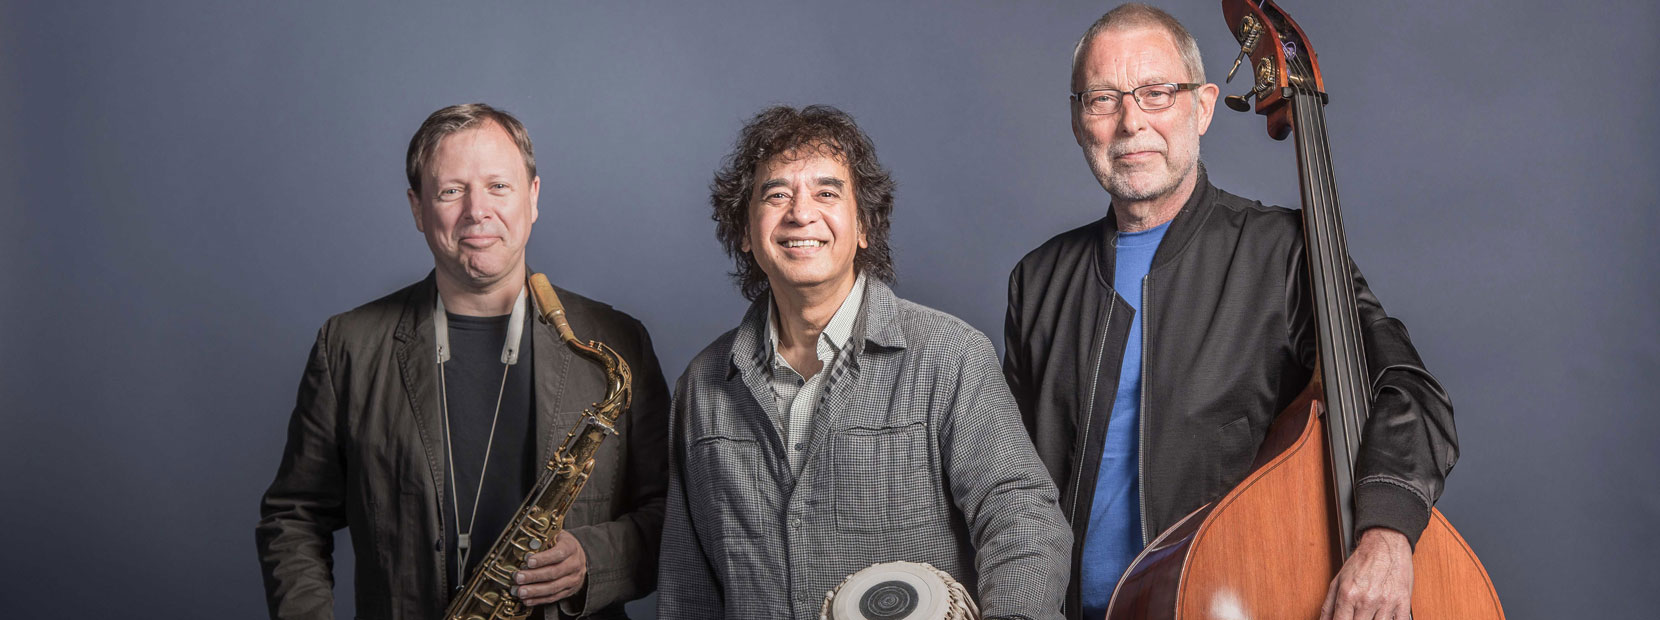 Dave Holland, Zakir Hussain and Chris Potter release “Good Hope”